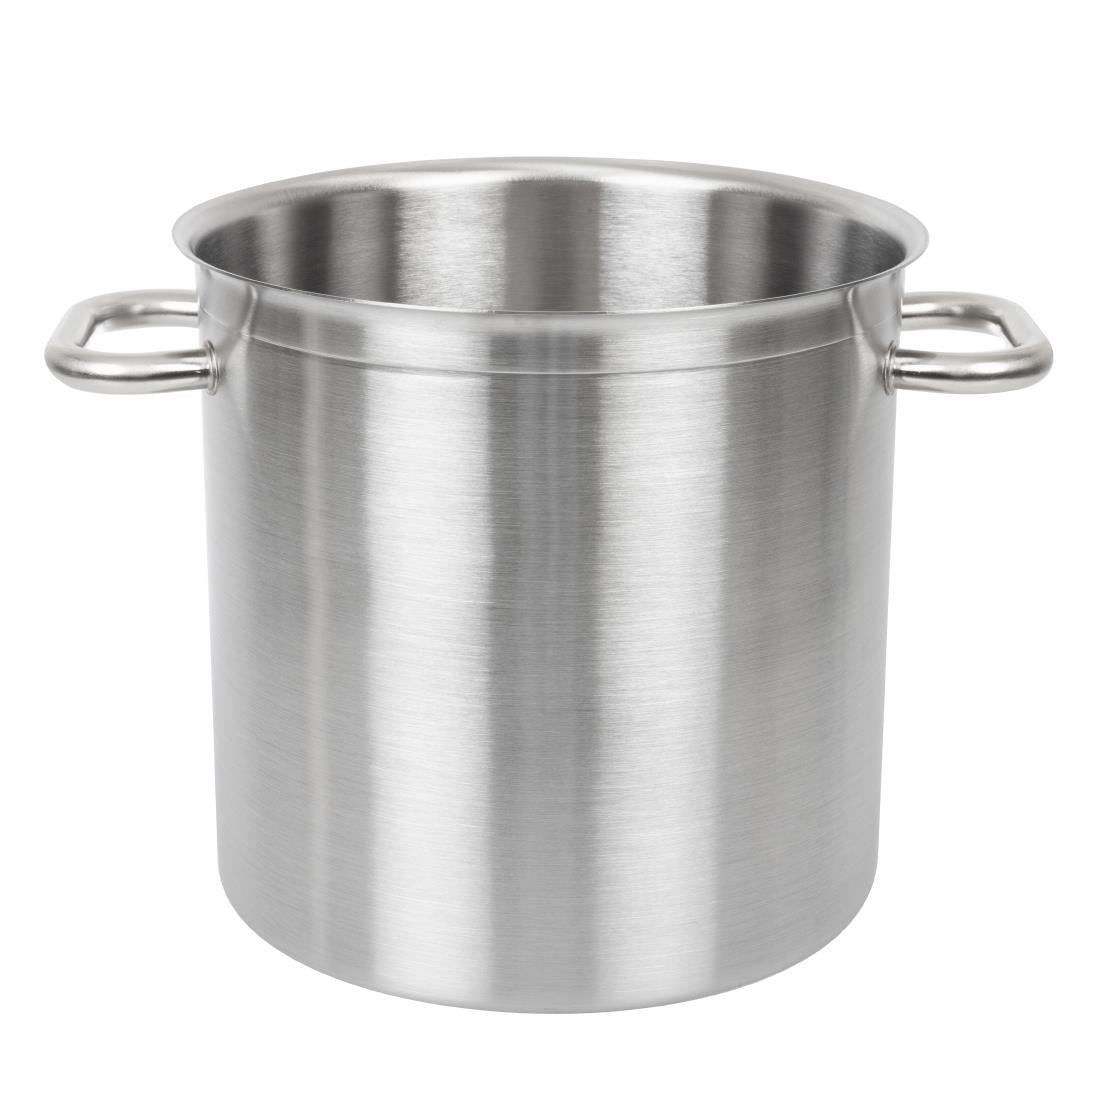 Bourgeat Excellence Stock Pot 17.2Ltr JD Catering Equipment Solutions Ltd